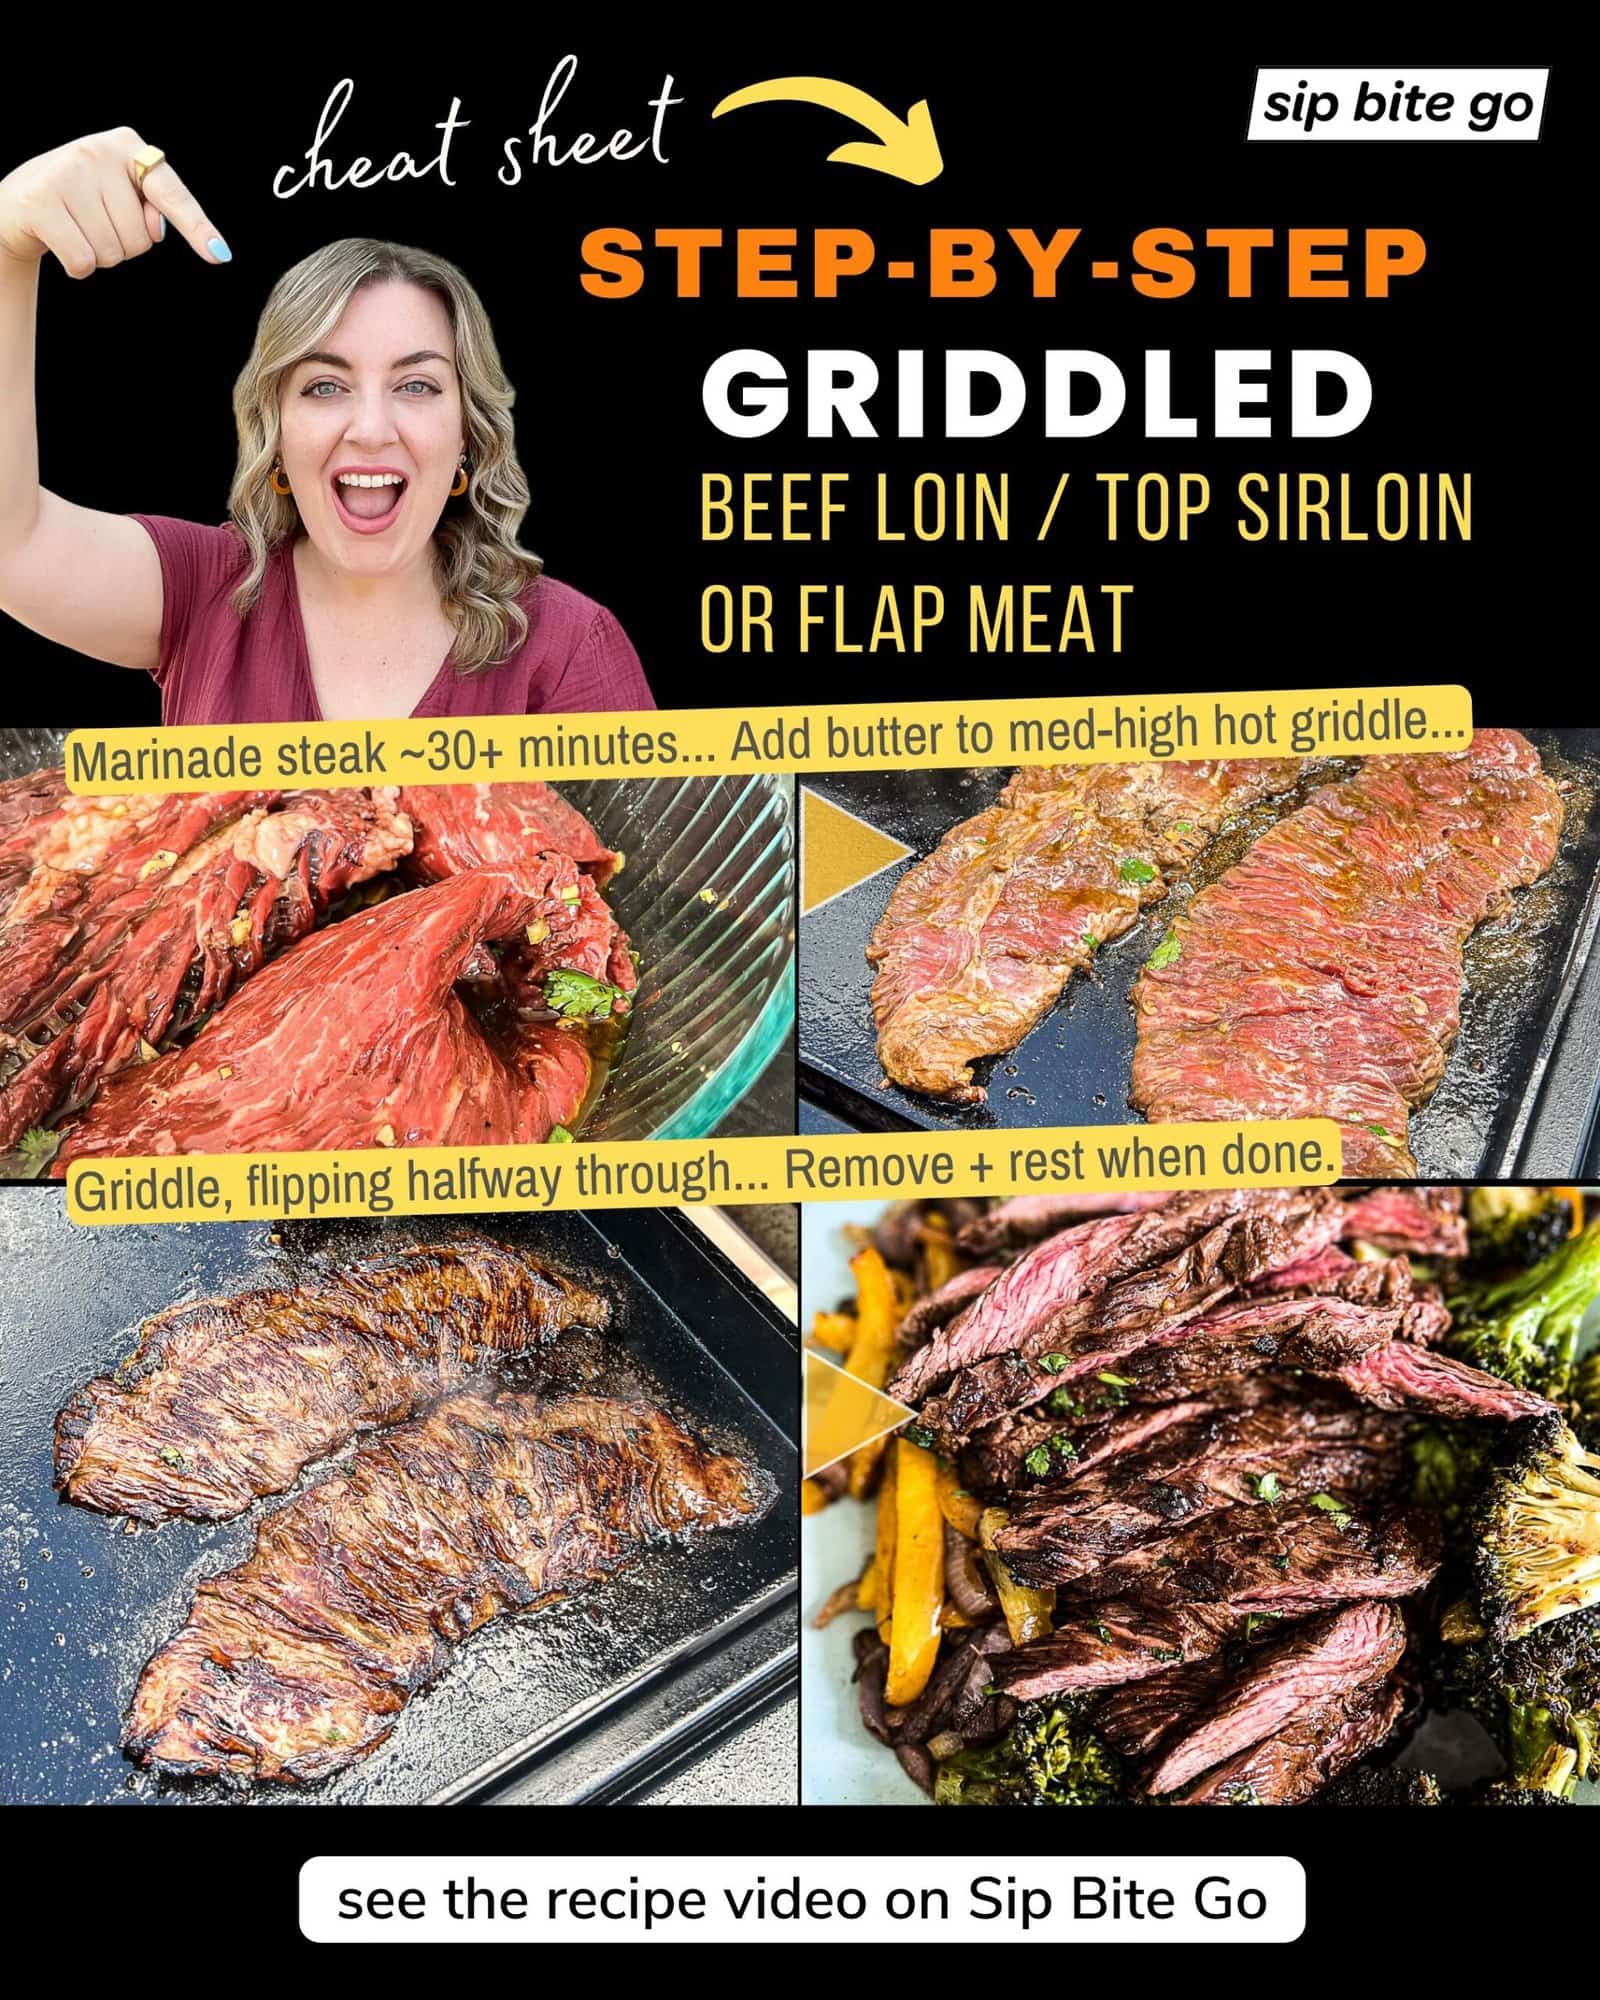 Infographic with recipe steps and captions describing how to griddle beef loin top sirloin on a Traeger Flatrock Griddle with Sip Bite Go logo